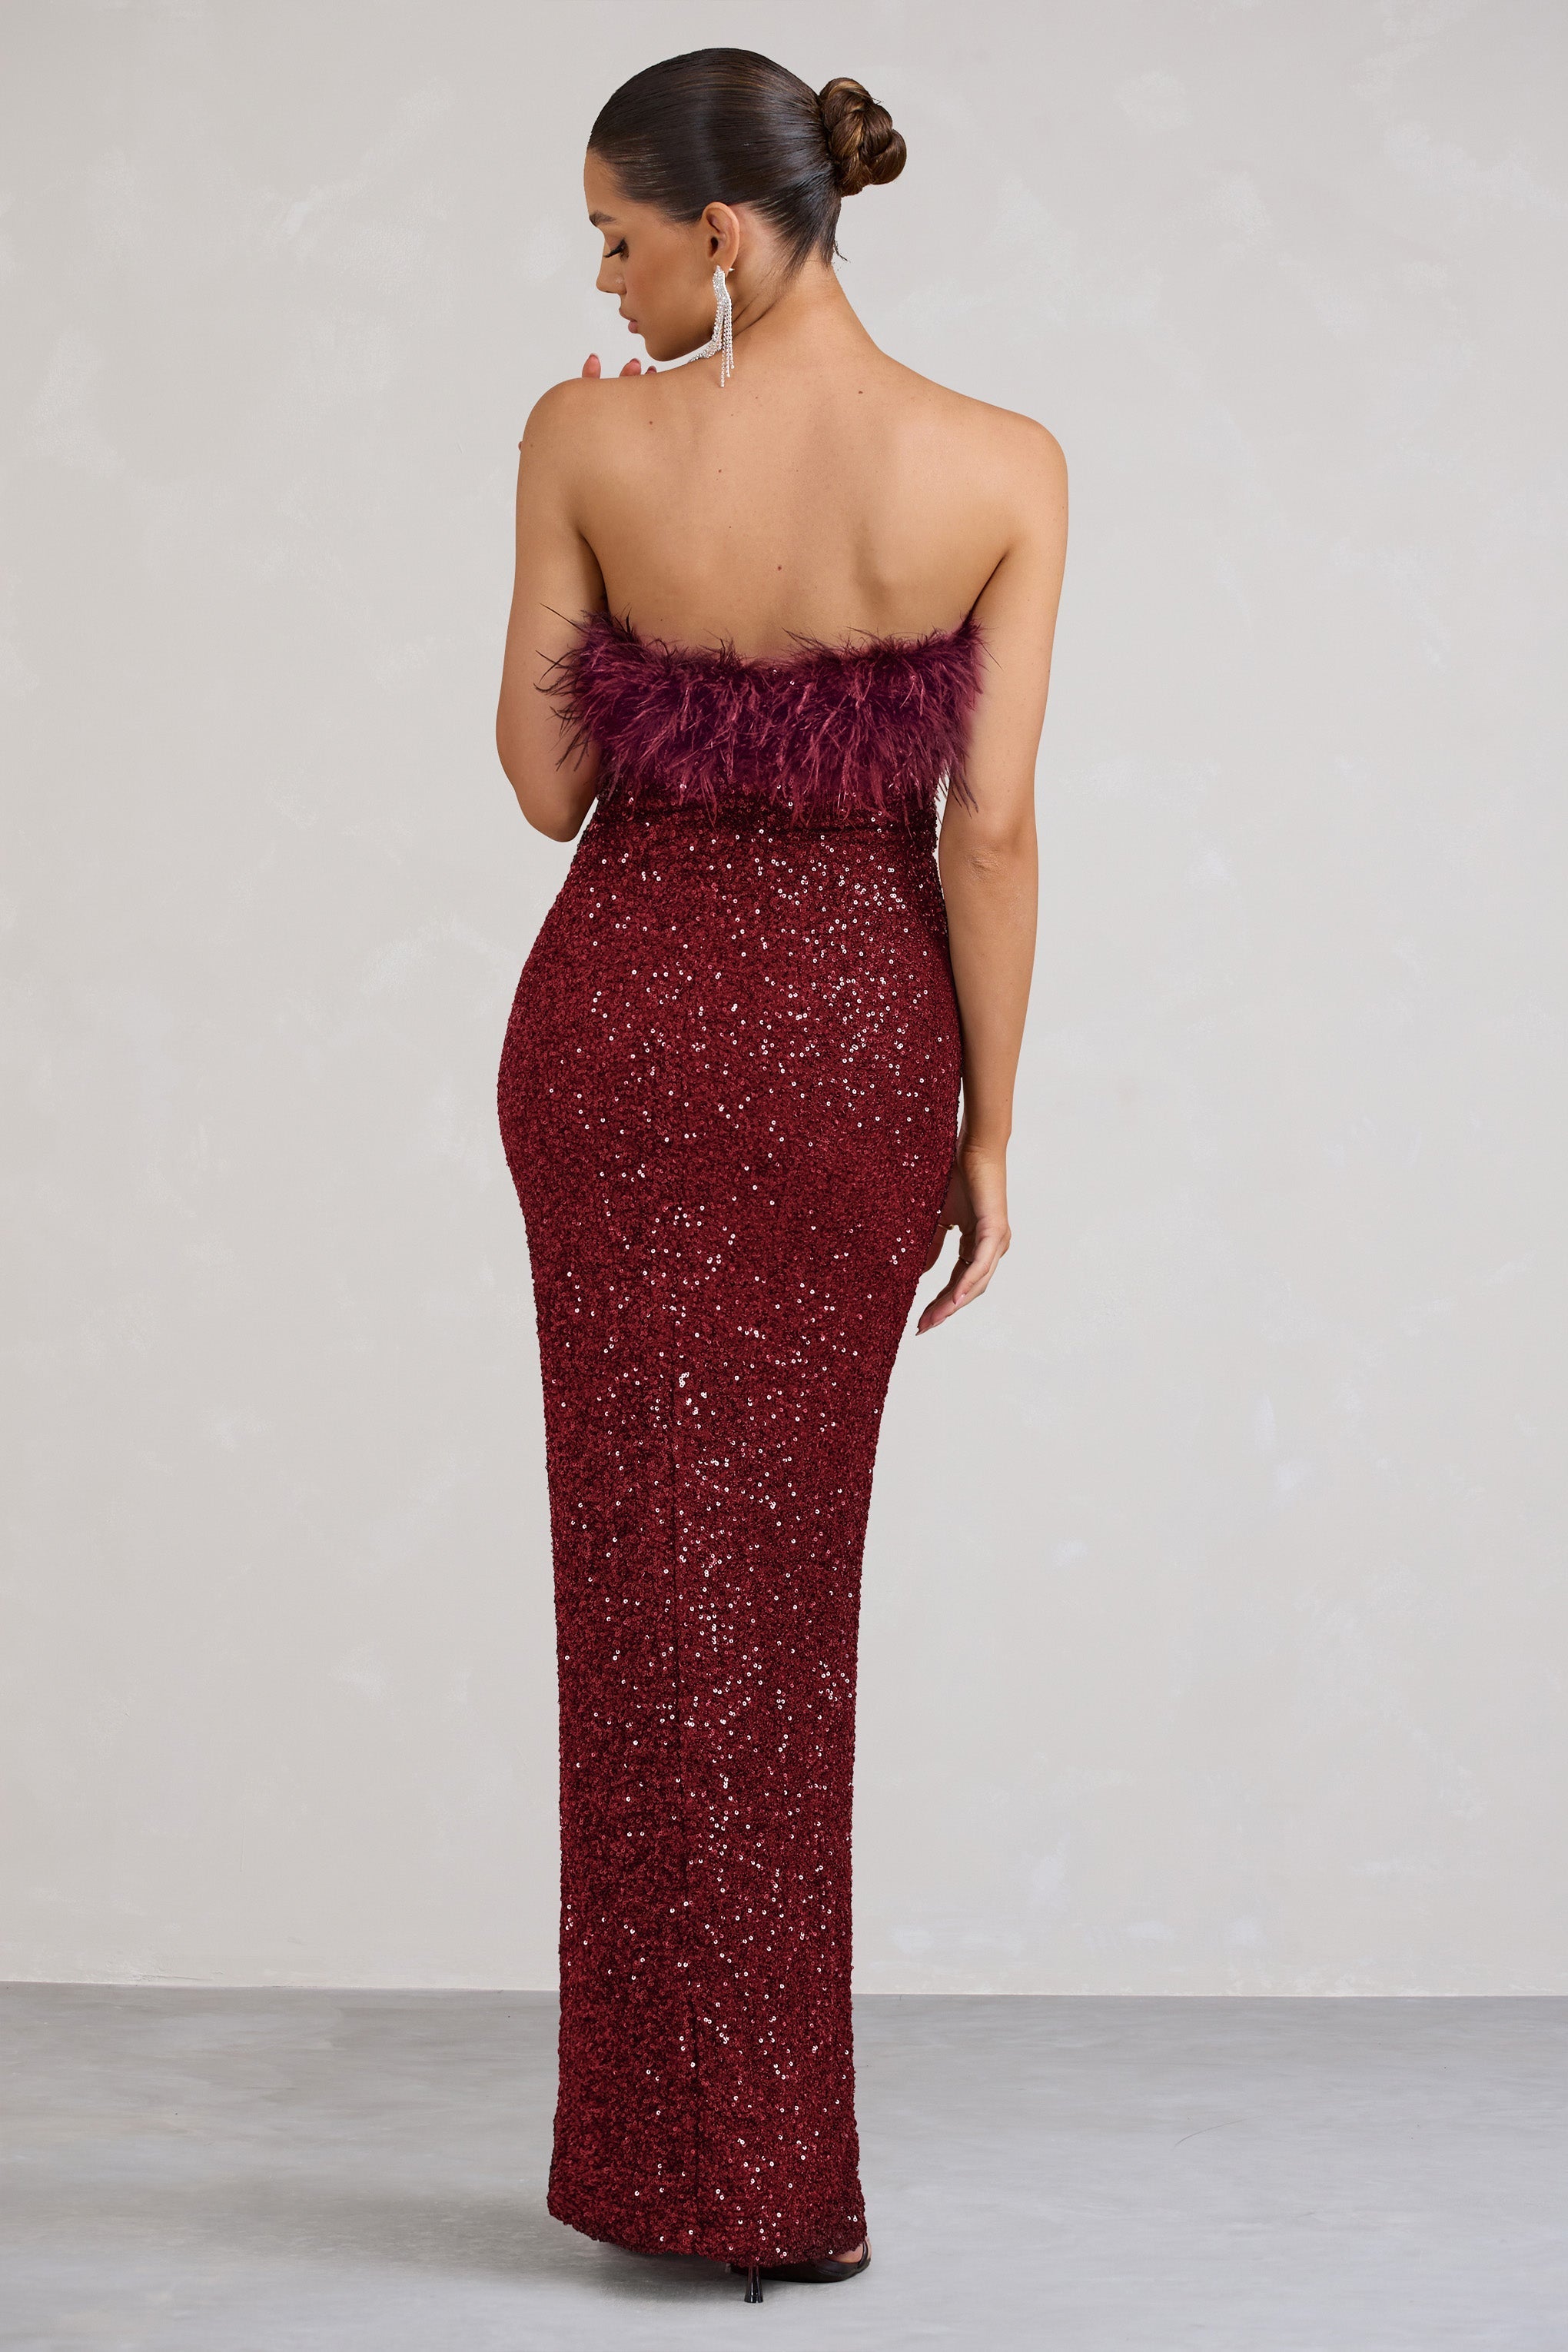 Old Money Burgundy Bodycon Sequin Maxi Dress With Feather Trim